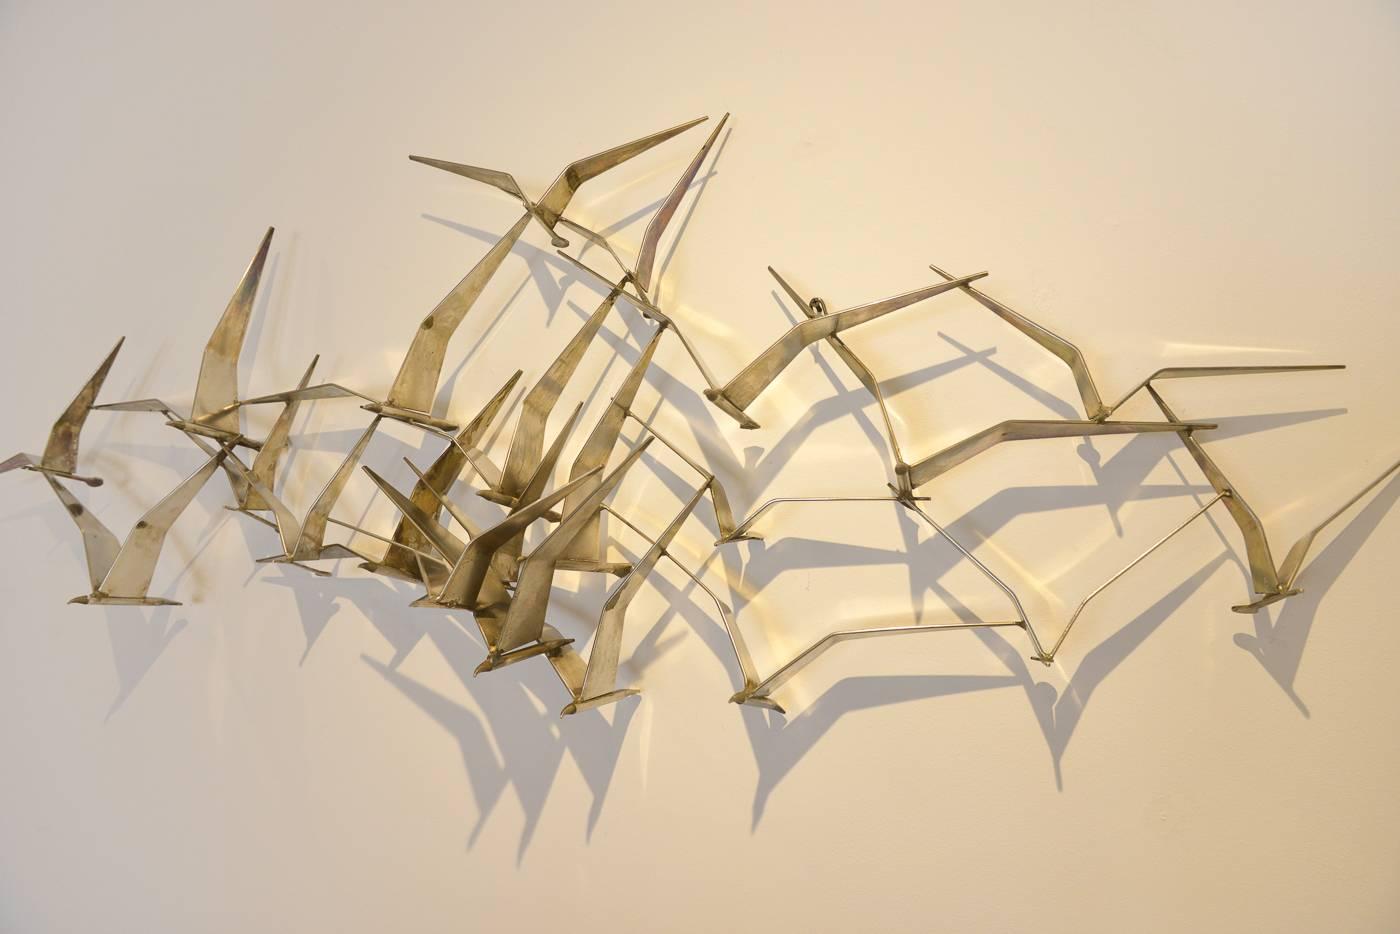 Beautiful original Curtis Jere for Artisan House shiny brass birds in flight. Signed C. Jere 1968, this piece is in excellent vintage condition with no rust or missing pieces. Beautiful Brutalist style art for your wall, the shiny brass finish is